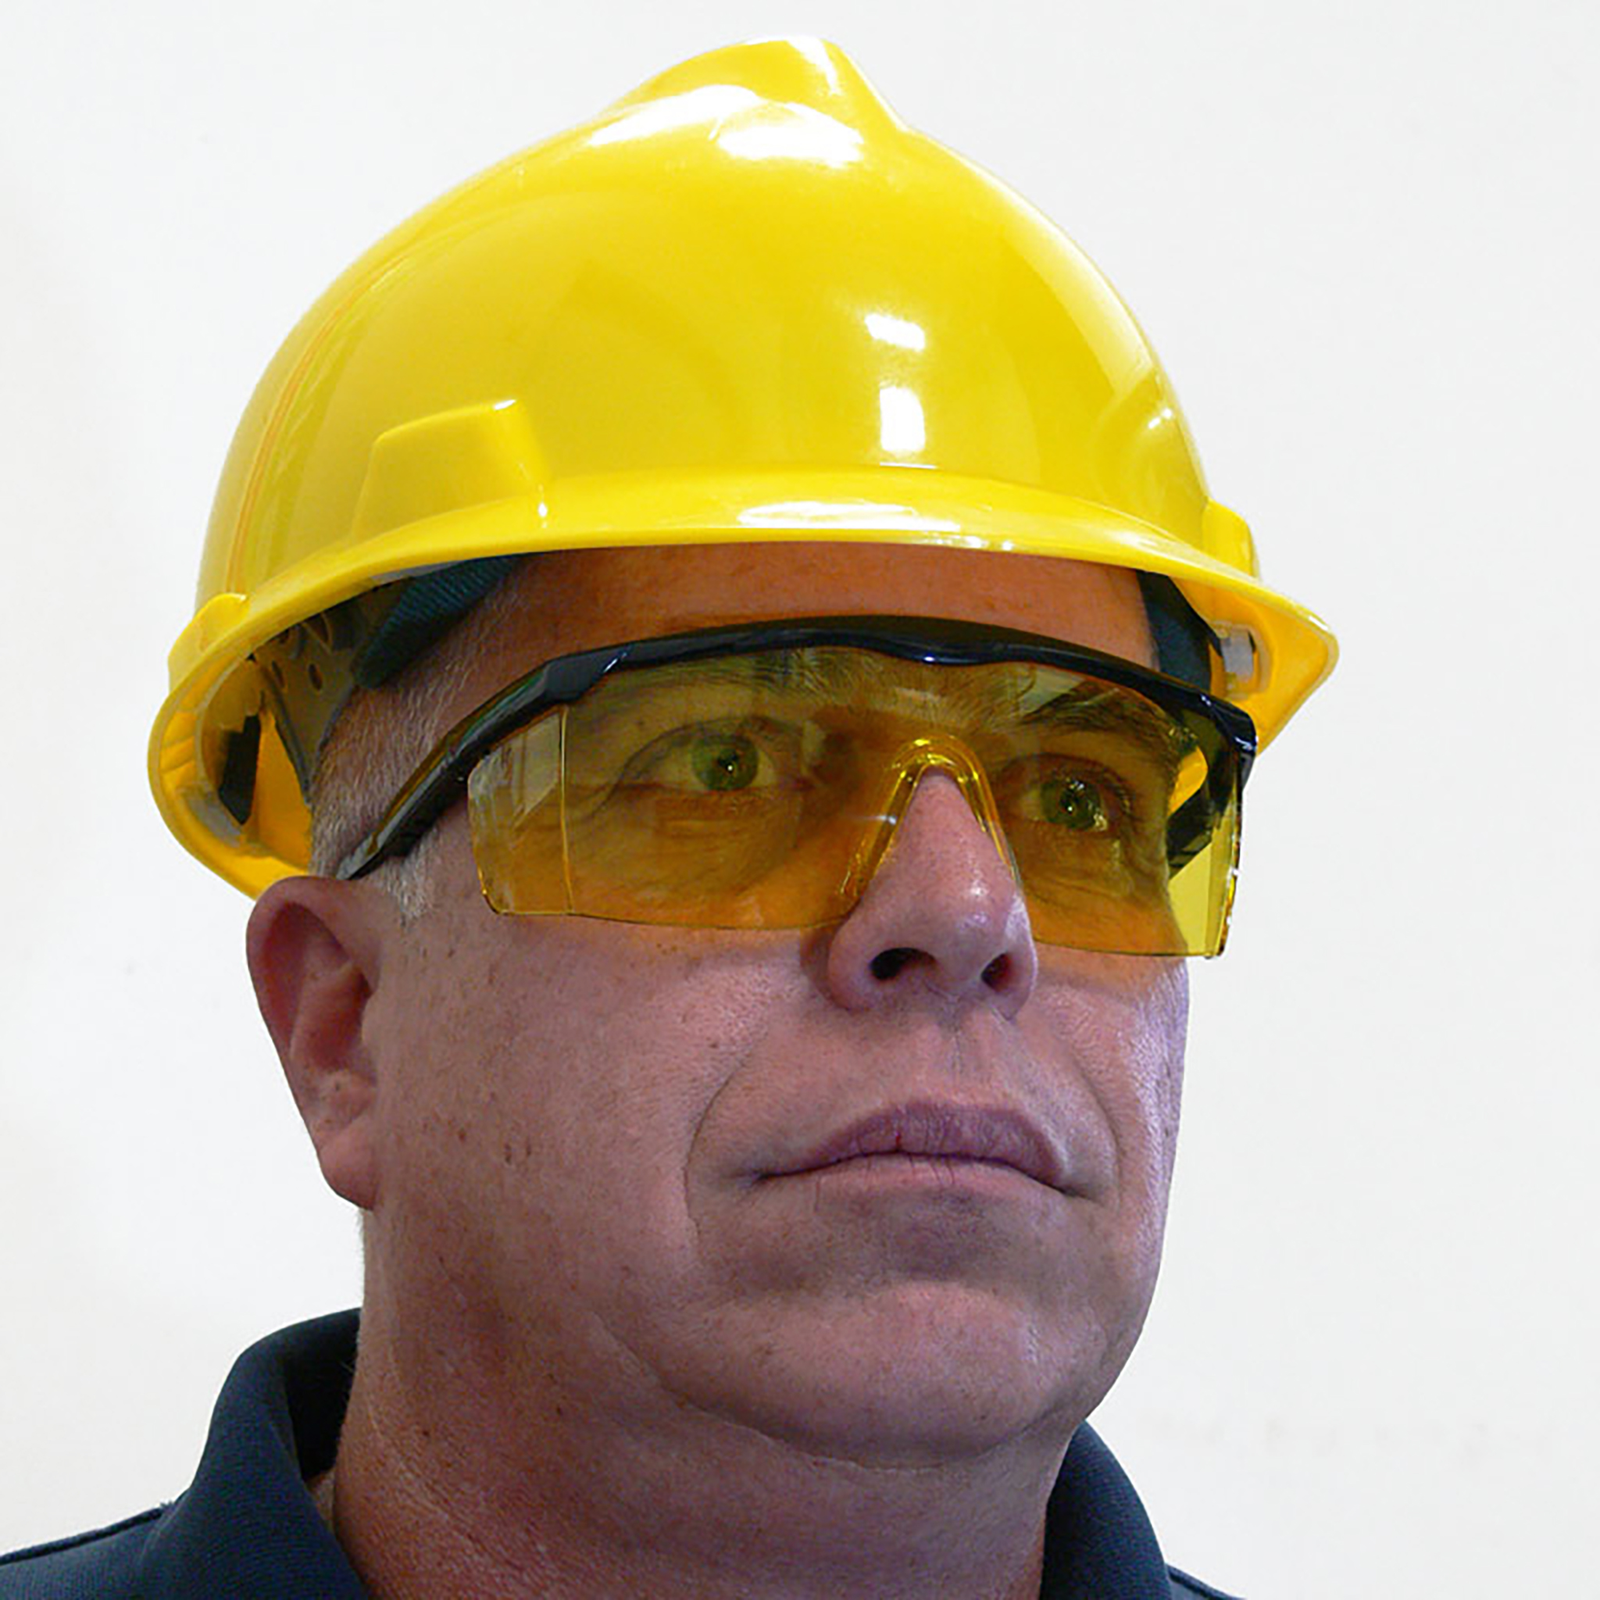 Man wearing a yellow cap stile hard hat and the JORESTECH framed rectangular safety glasses with UV protection and side shields for high impact protection